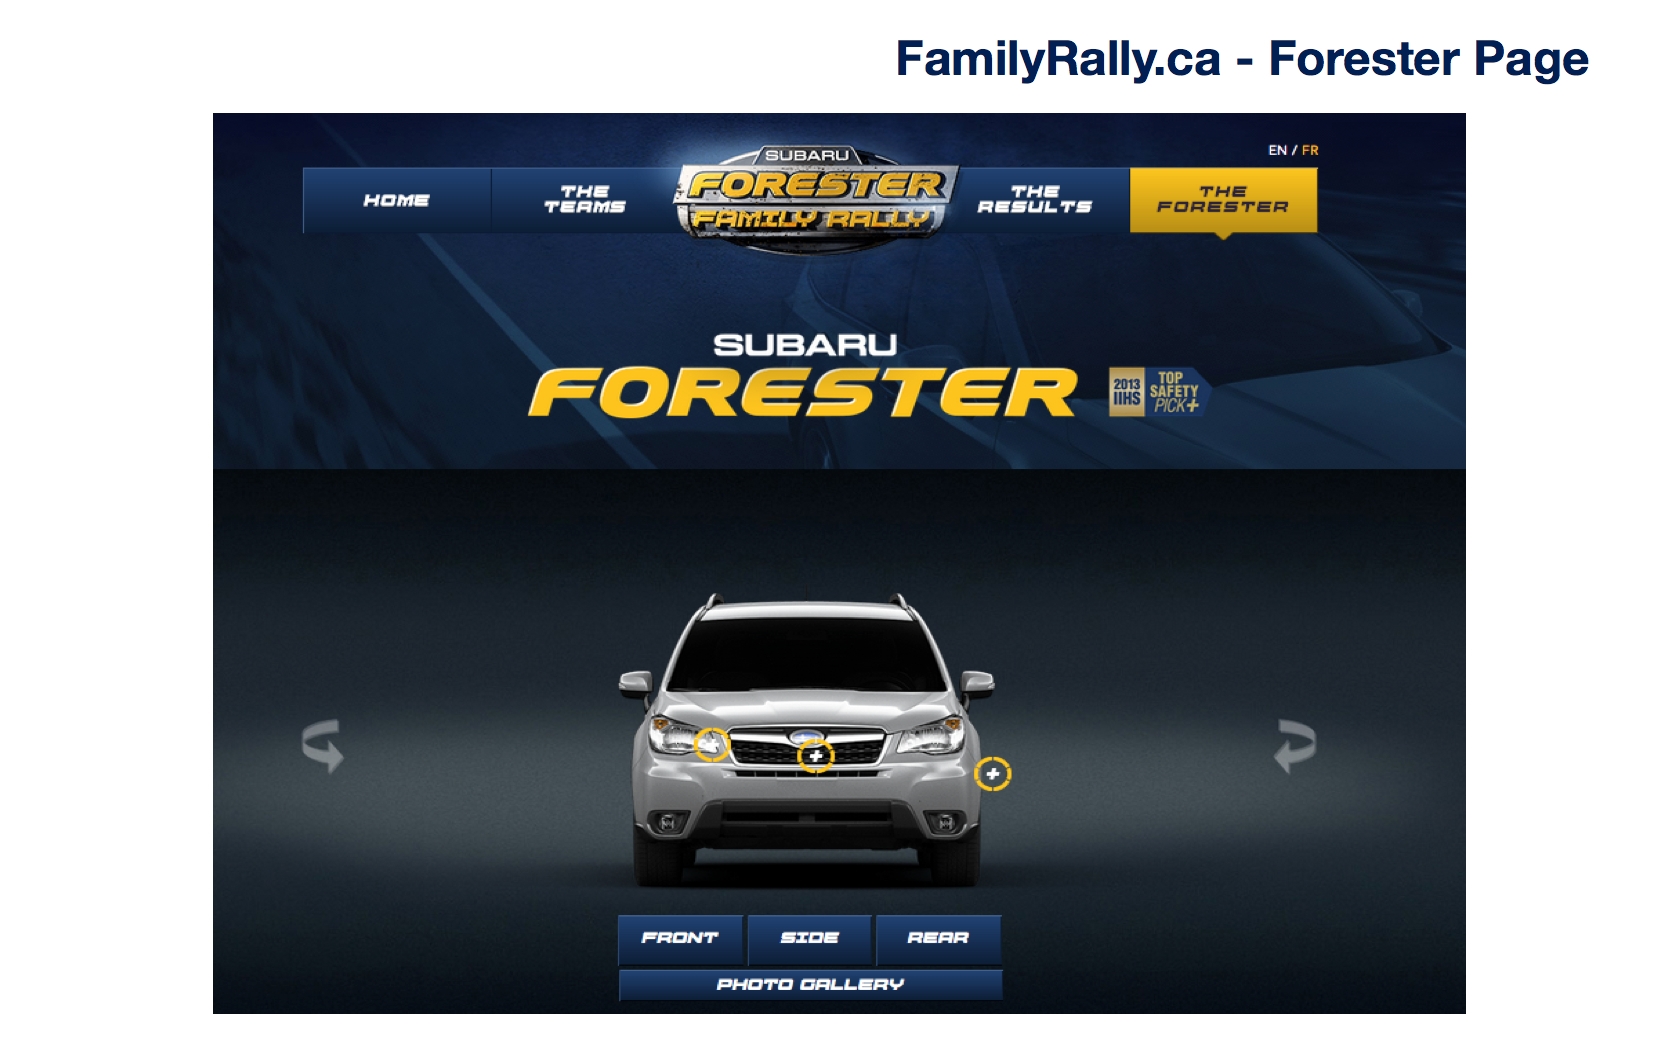 12325_Cassies_-_Subaru_Forester_Family_Rally_Creative_Elements.009